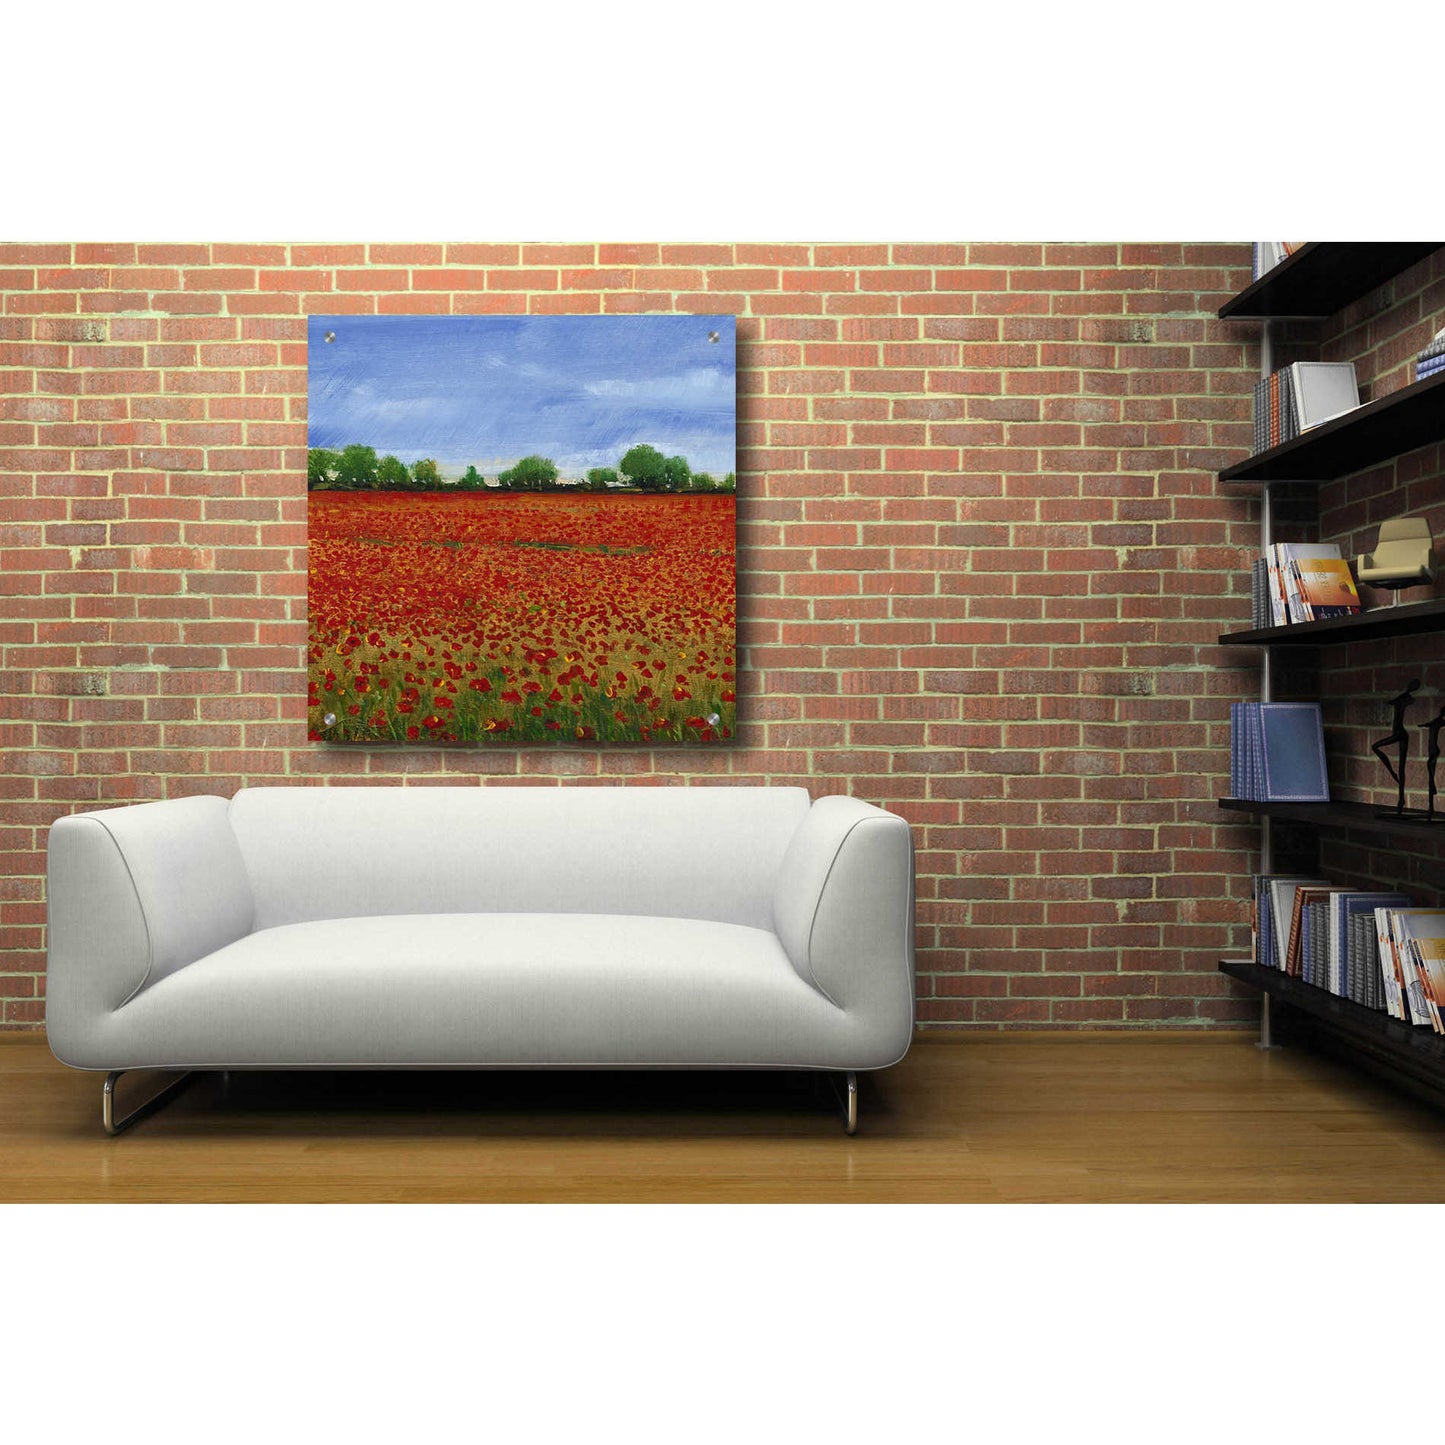 Epic Art 'Field of Poppies I' by Tim O'Toole, Acrylic Glass Wall Art,36x36